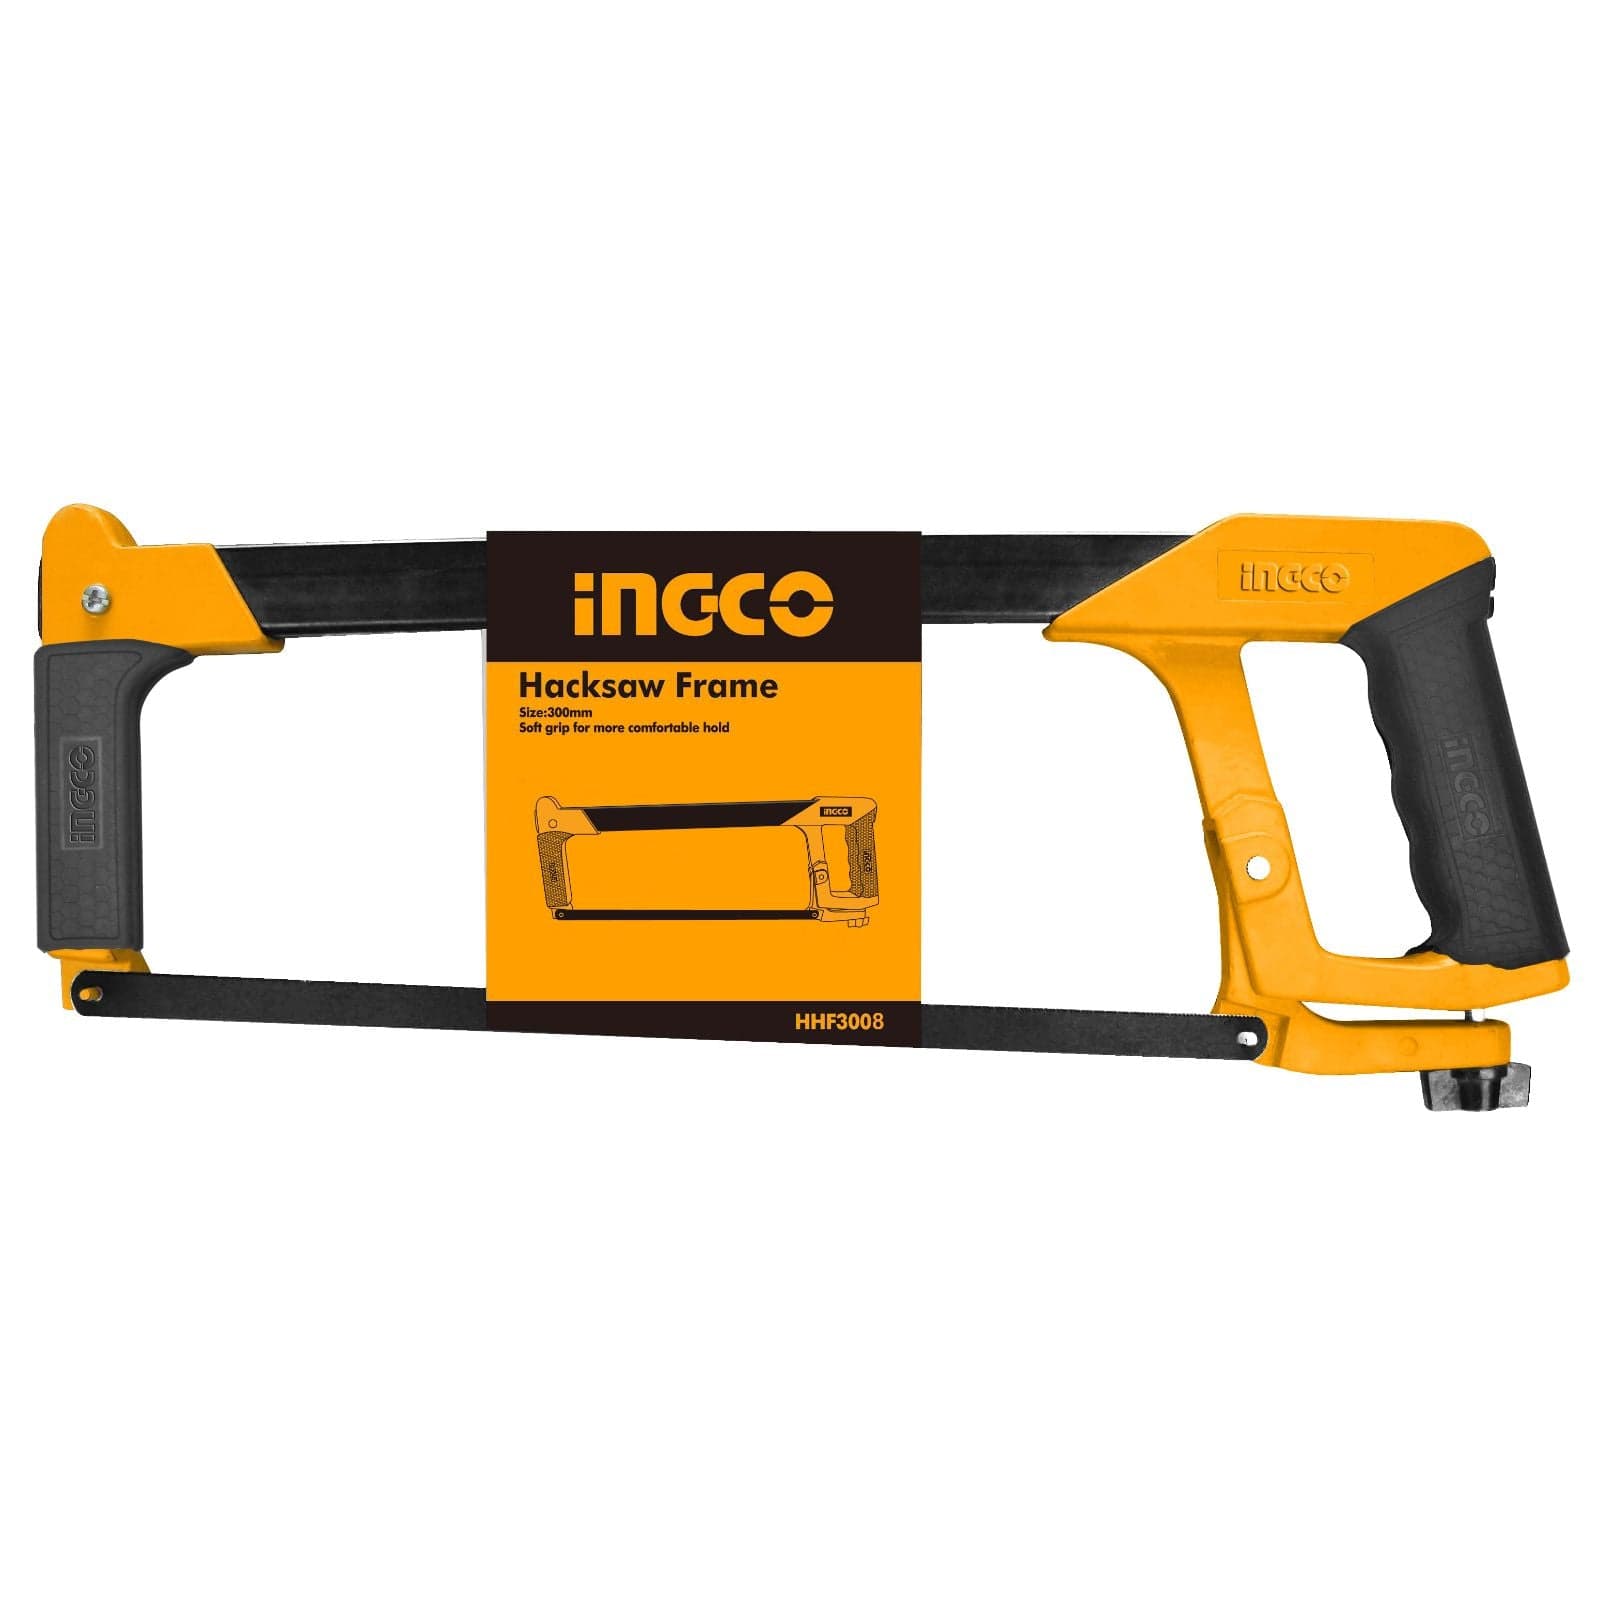 Ingco 12" Industrial Hacksaw Frame - HHF3008 | Supply Master | Accra, Ghana Hand Saws & Cutting Tools Buy Tools hardware Building materials